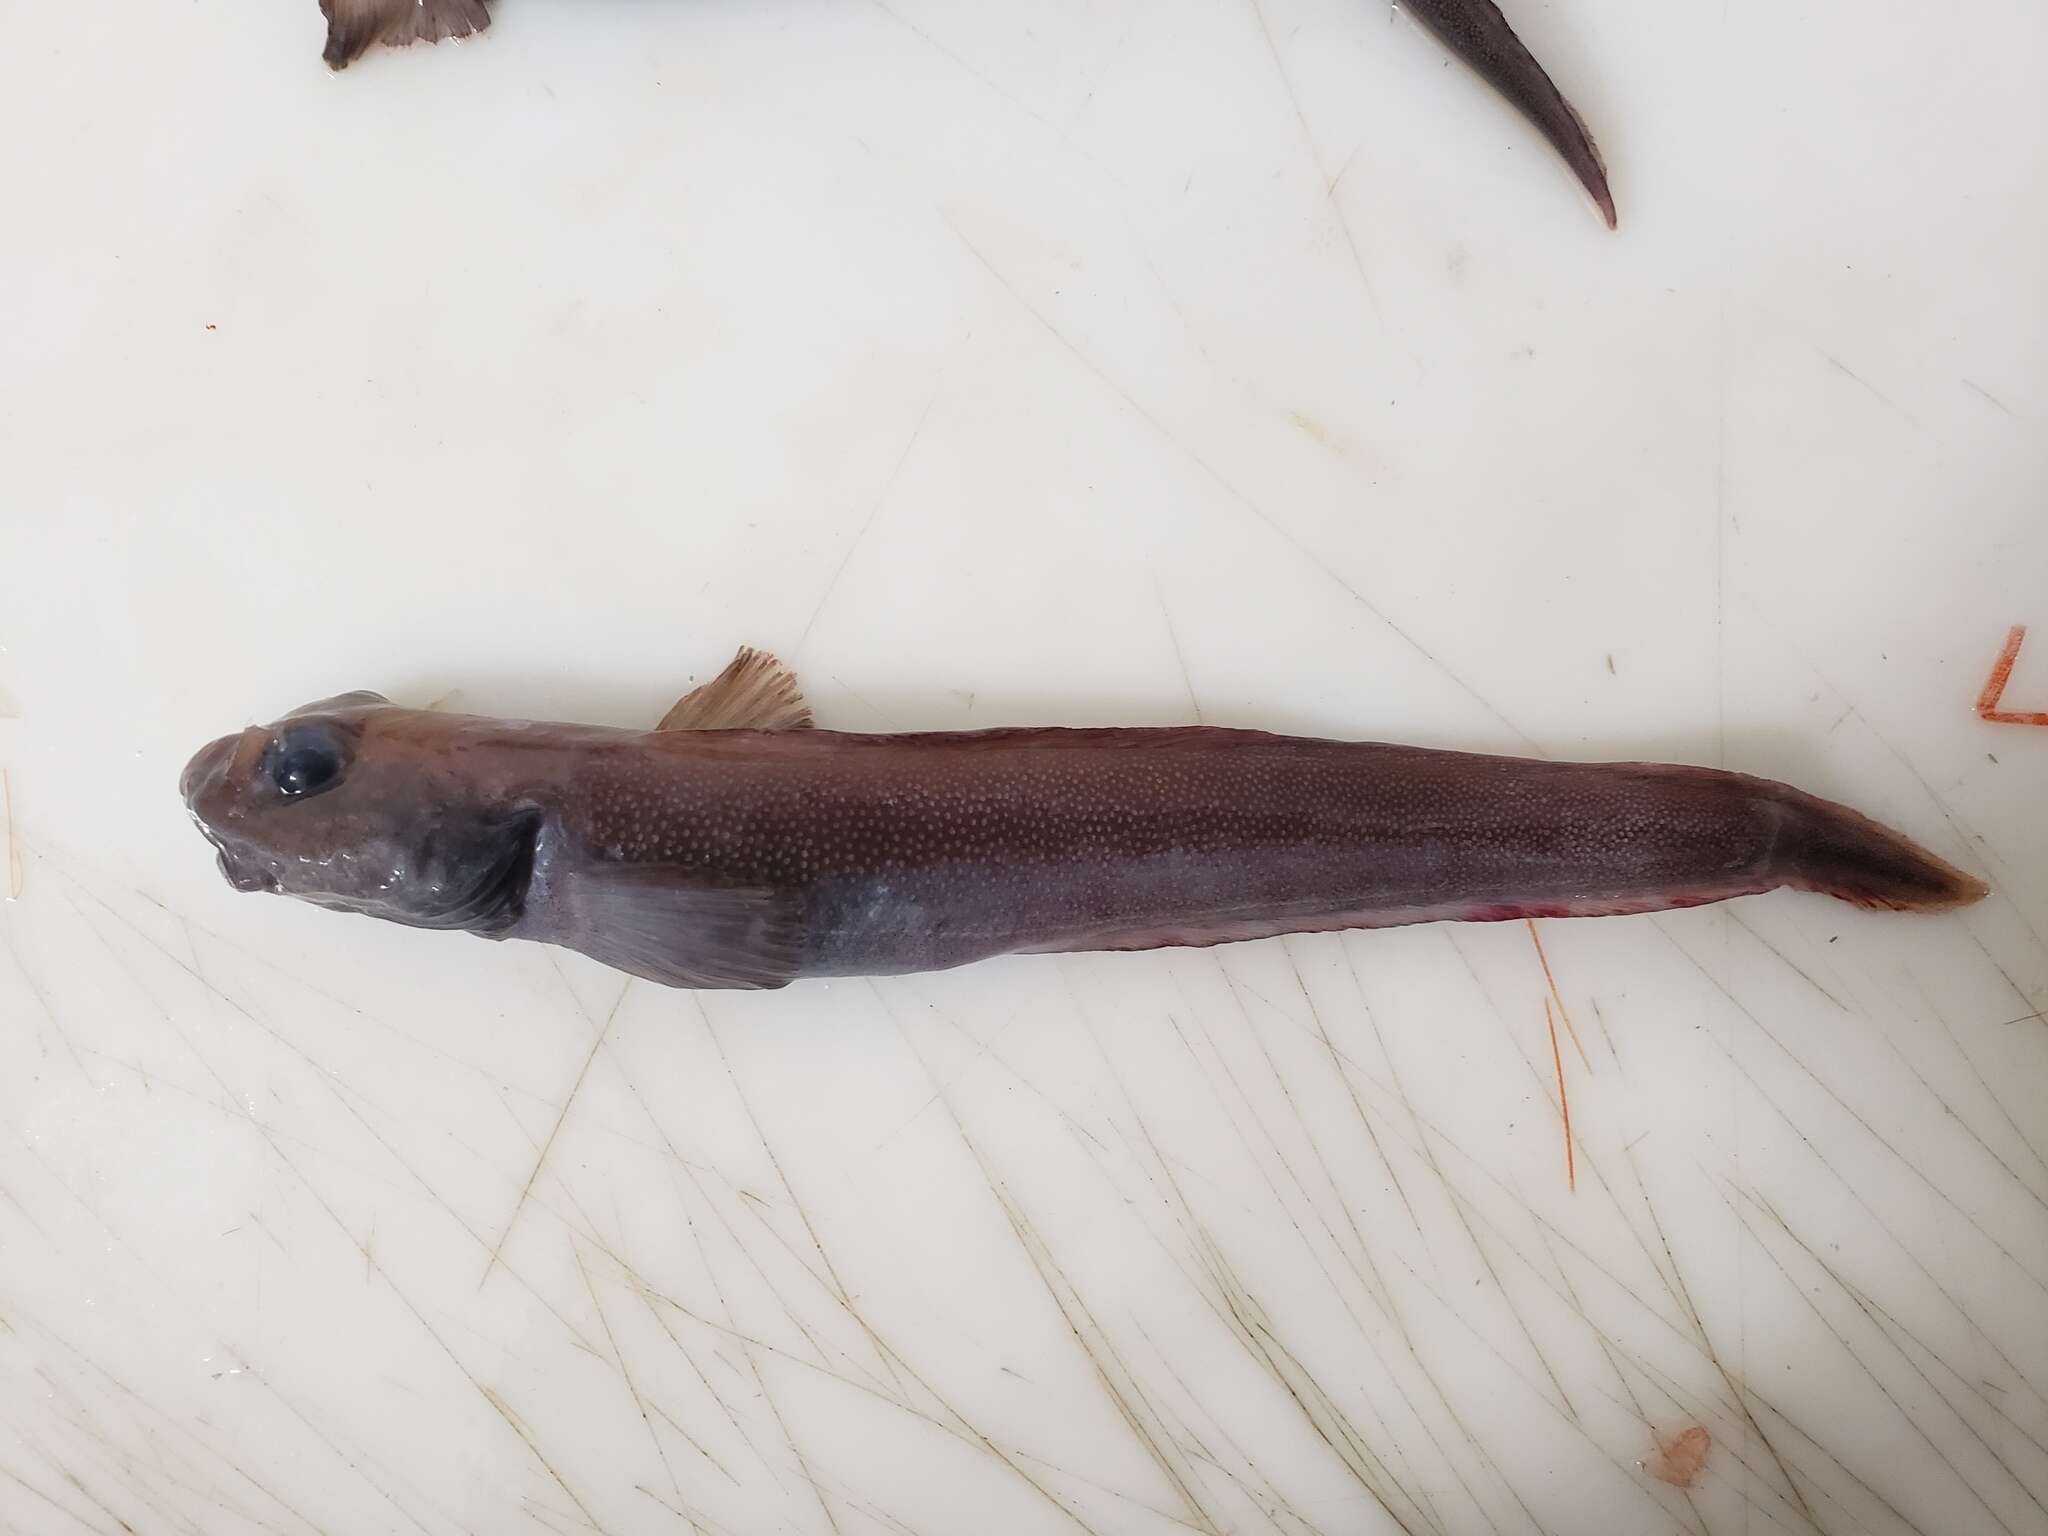 Image of Paamiut eelpout